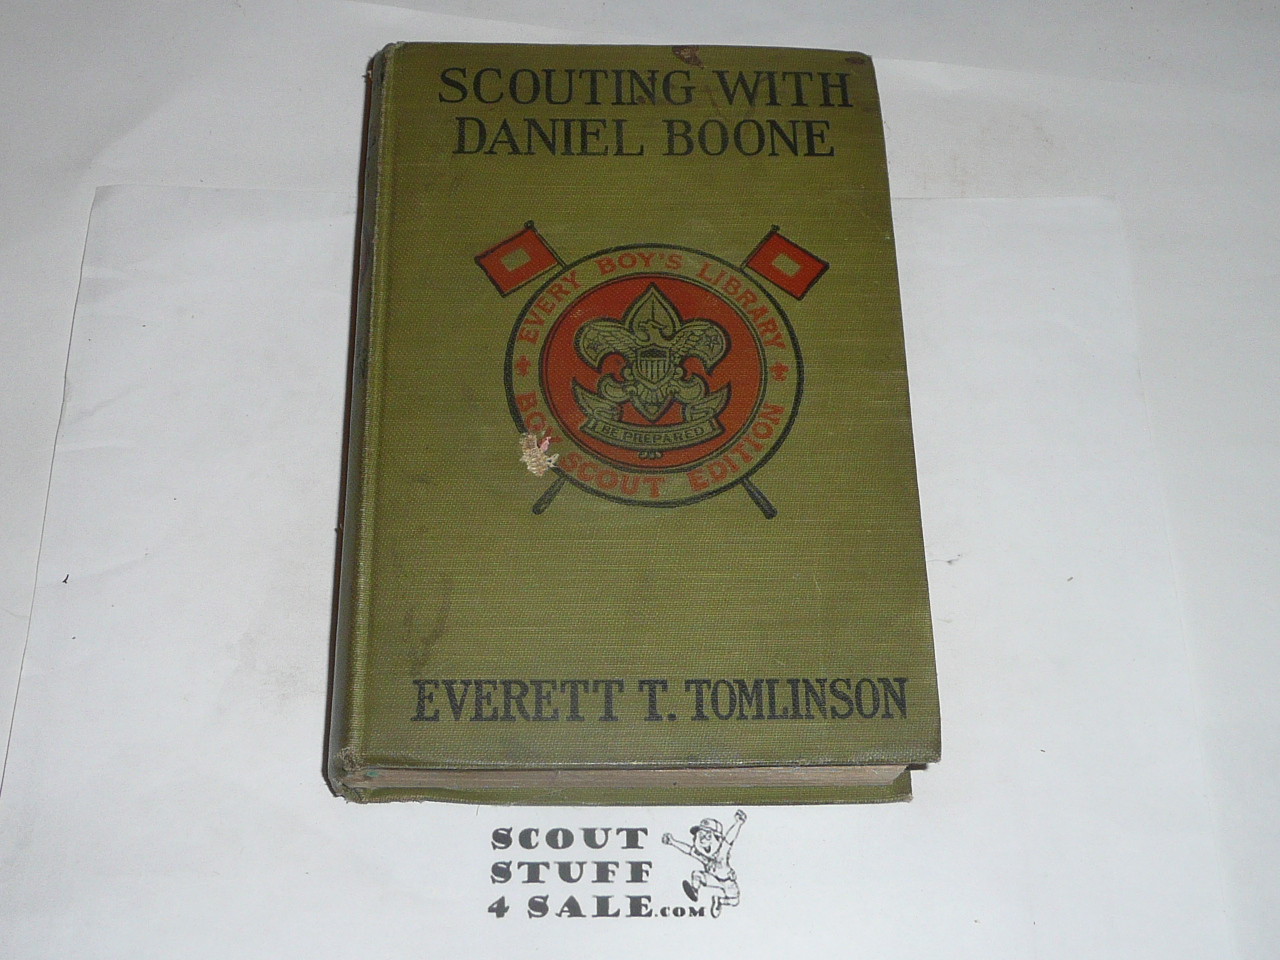 Scouting With Daniel Boone. By Everett T. Tomlinson, 1914, Every Boy's Library Edition, Type Two Binding